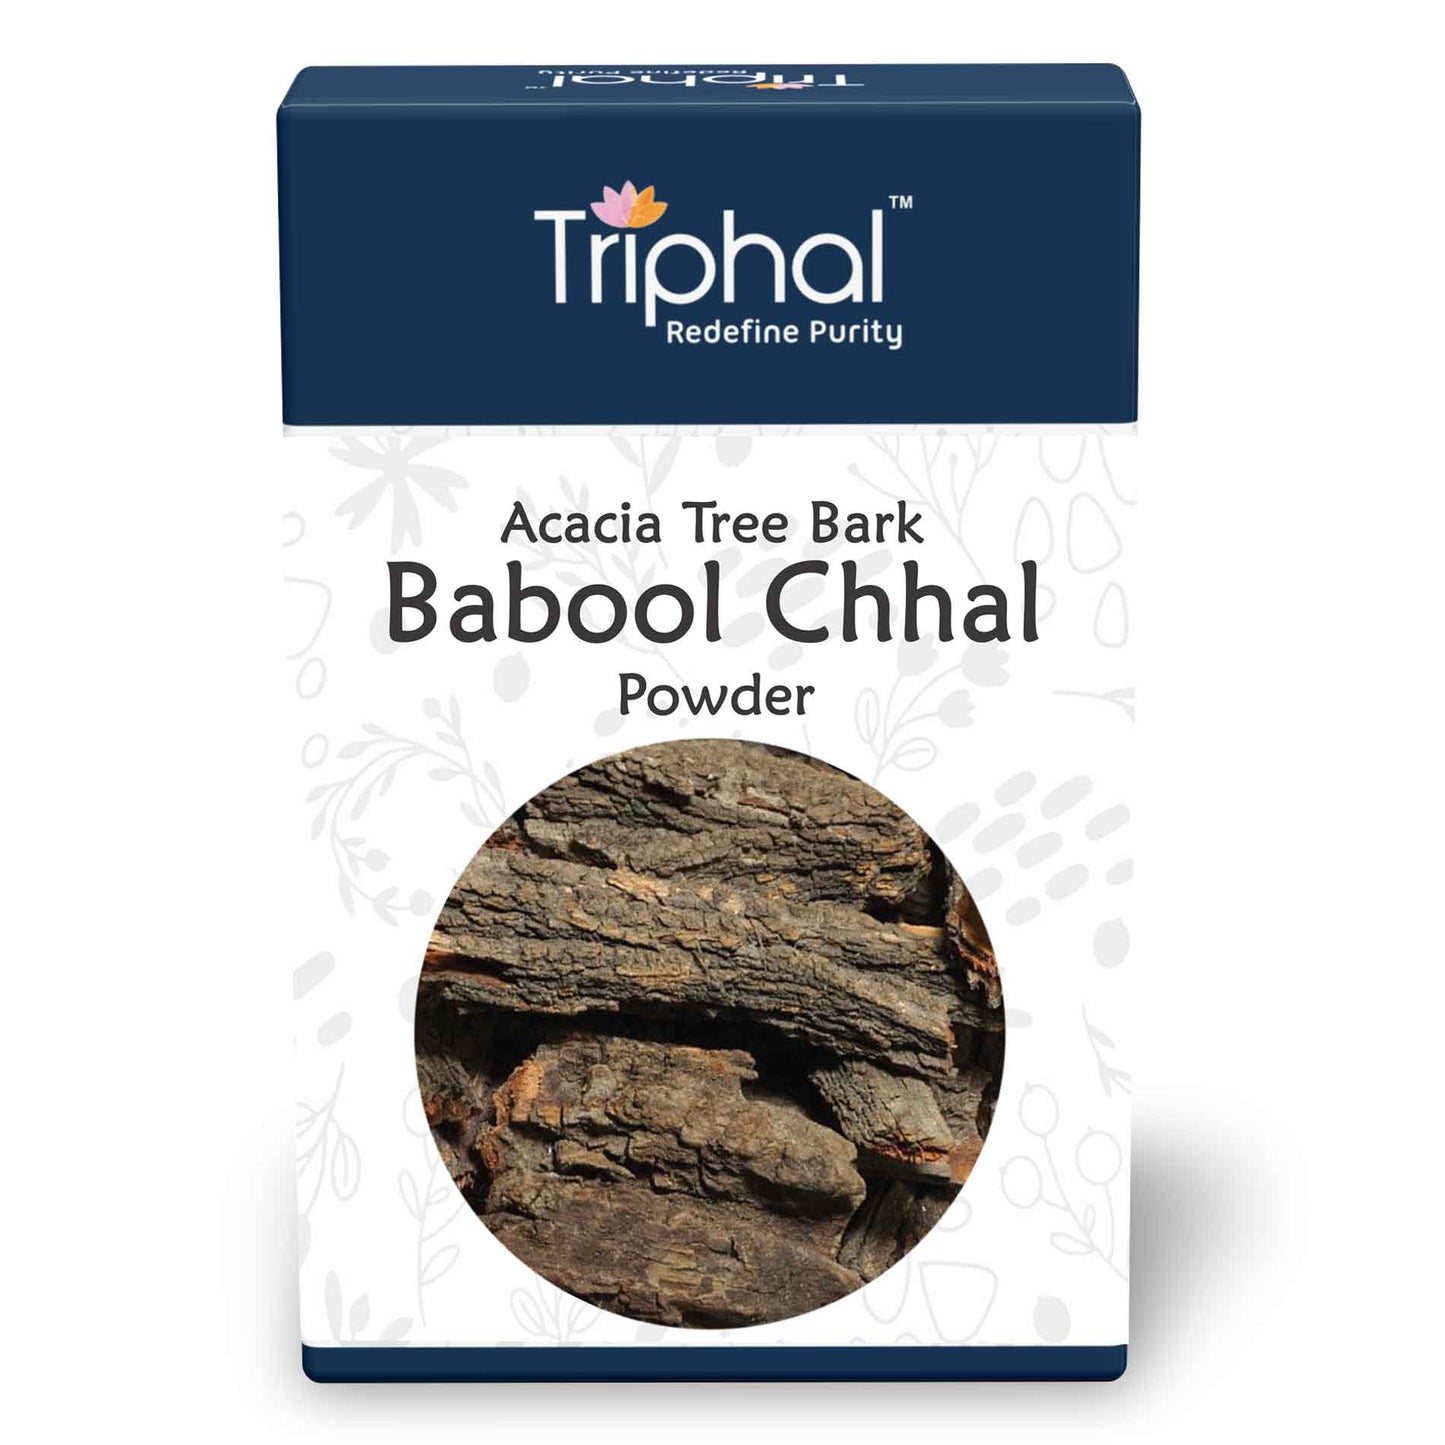 Babul chal powder by Triphal - best quality powder for well being